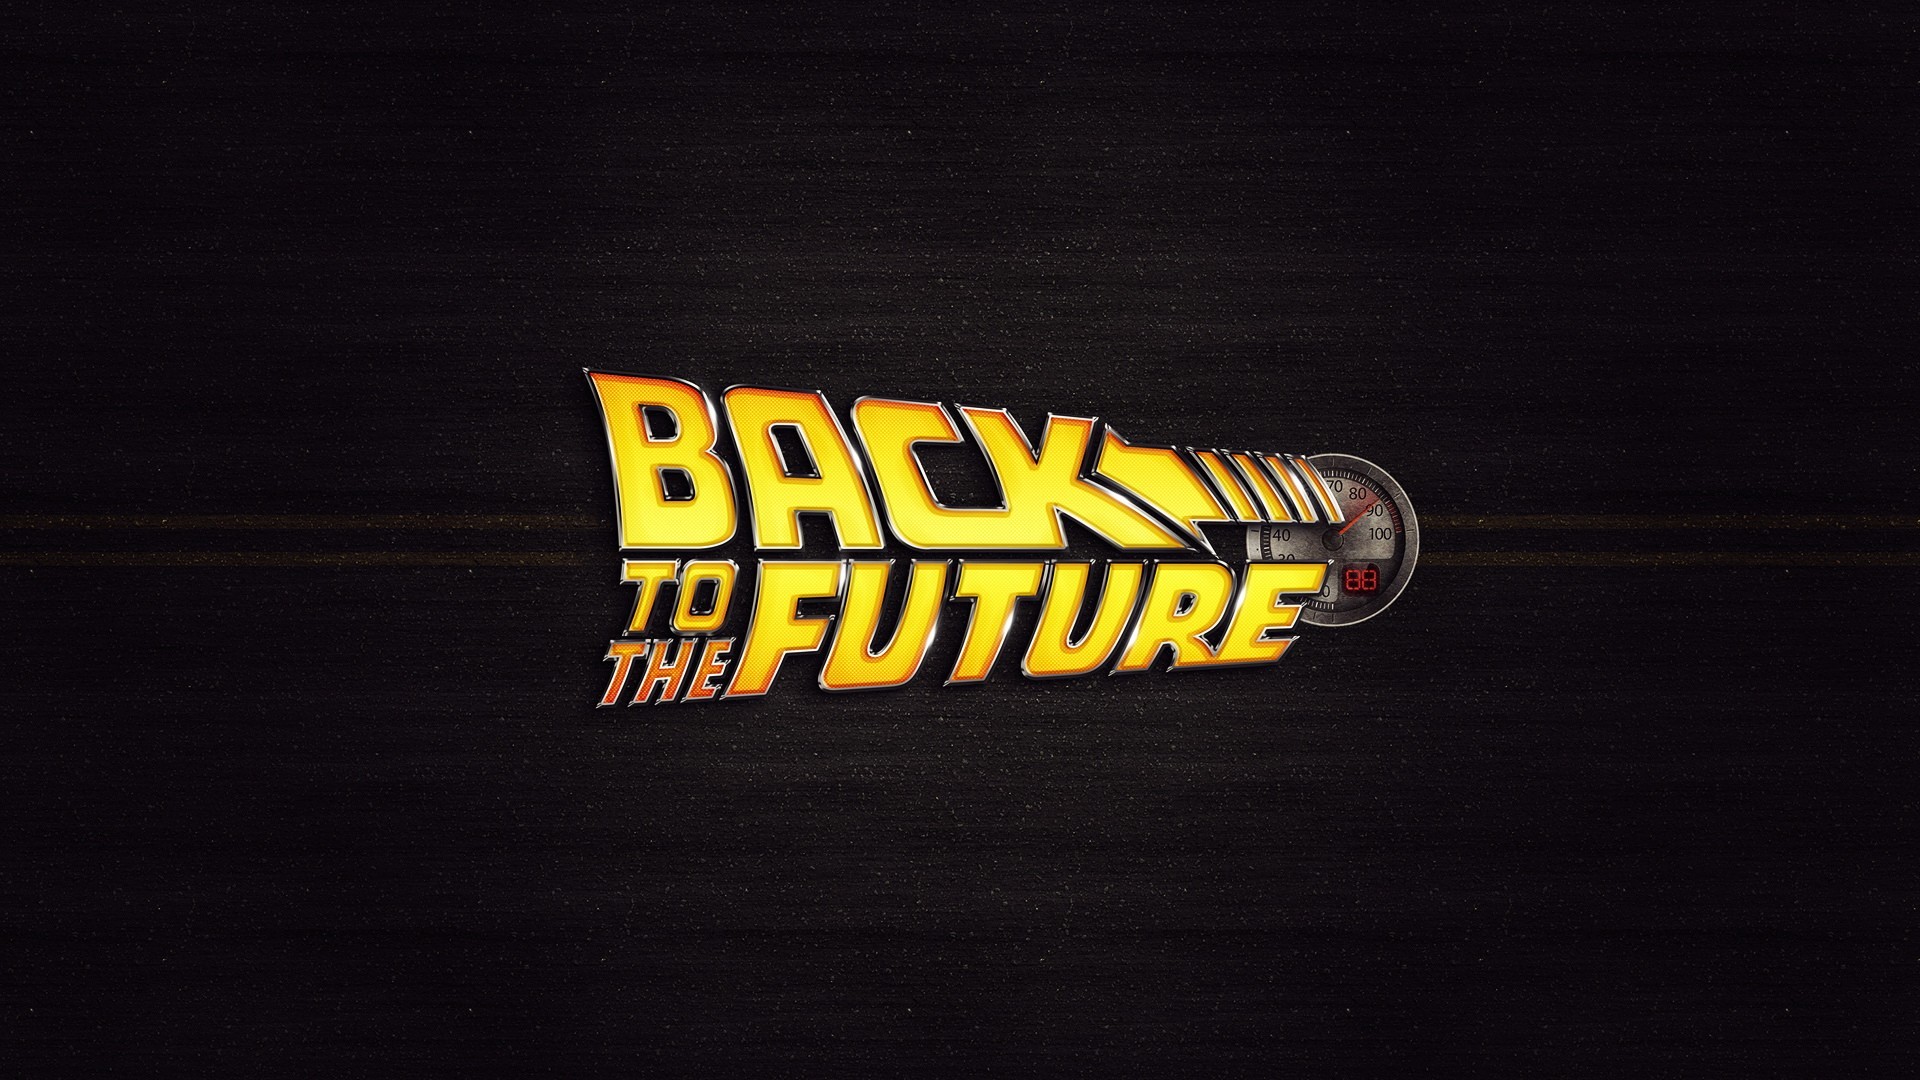 General 1920x1080 Back to the Future movies speedometer digital art simple background numbers logo